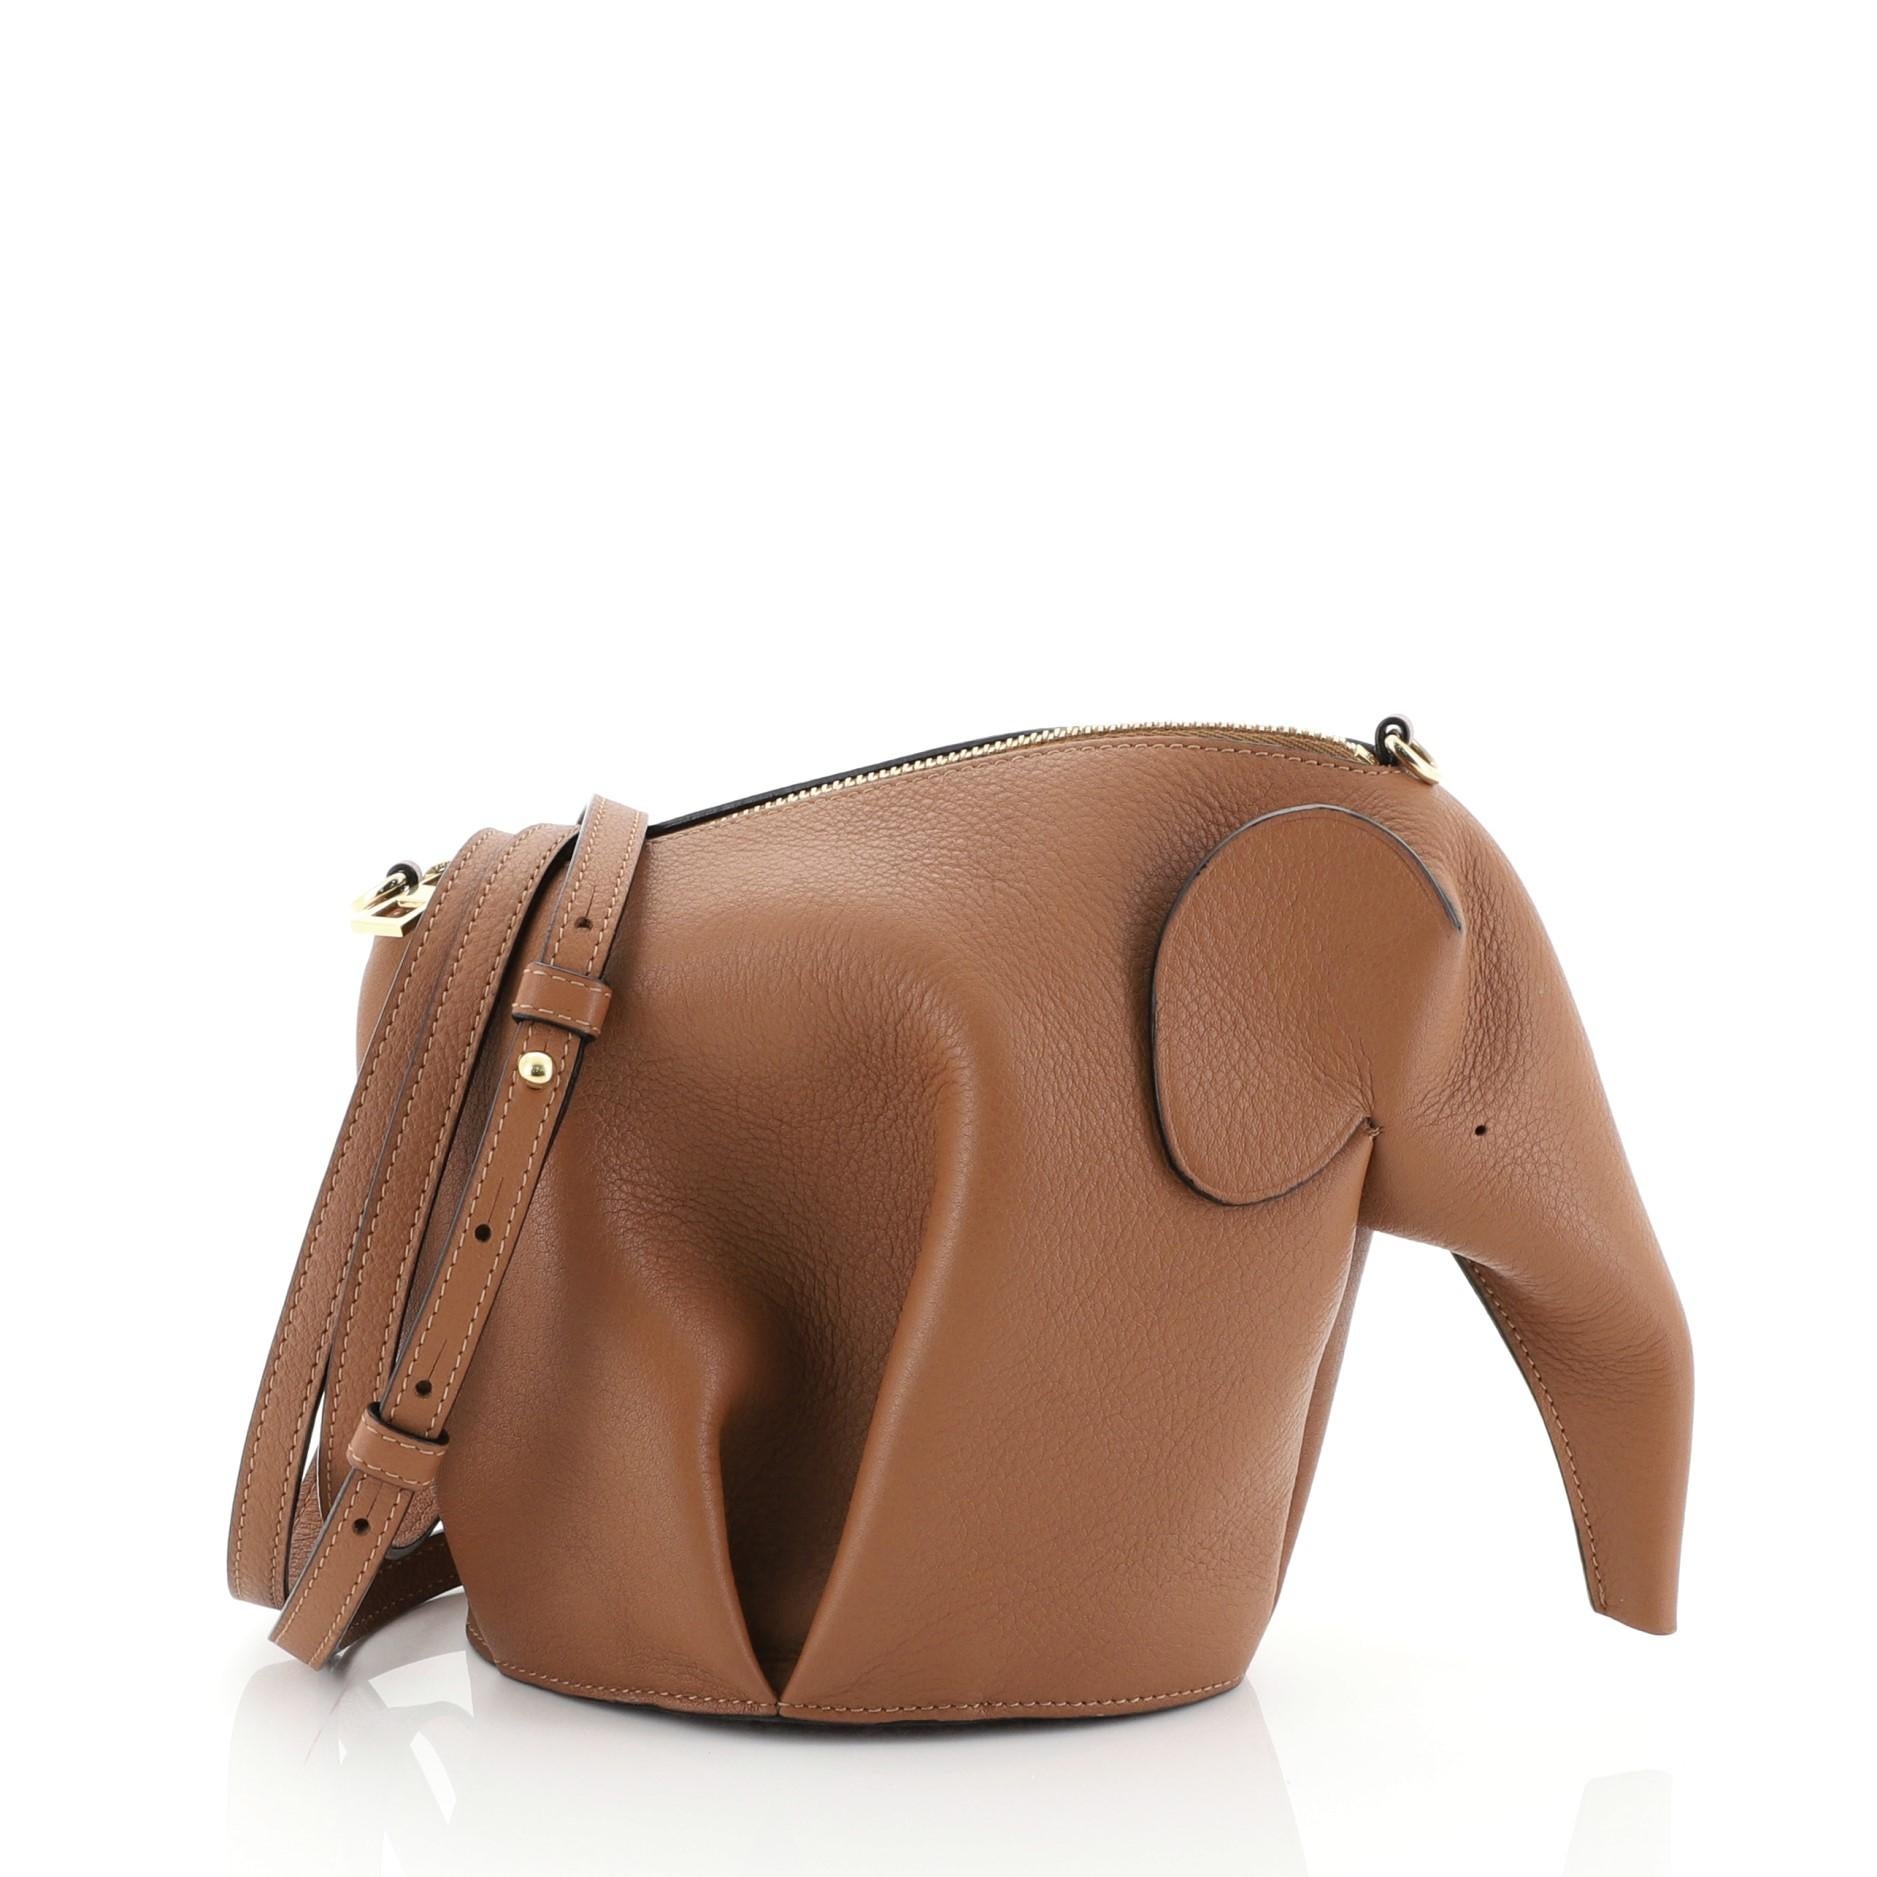 This Loewe Elephant Crossbody Bag Leather Mini, crafted in brown leather, features an adjustable crossbody strap, an elephant silhouette complete with a long trunk and dot-perforated 